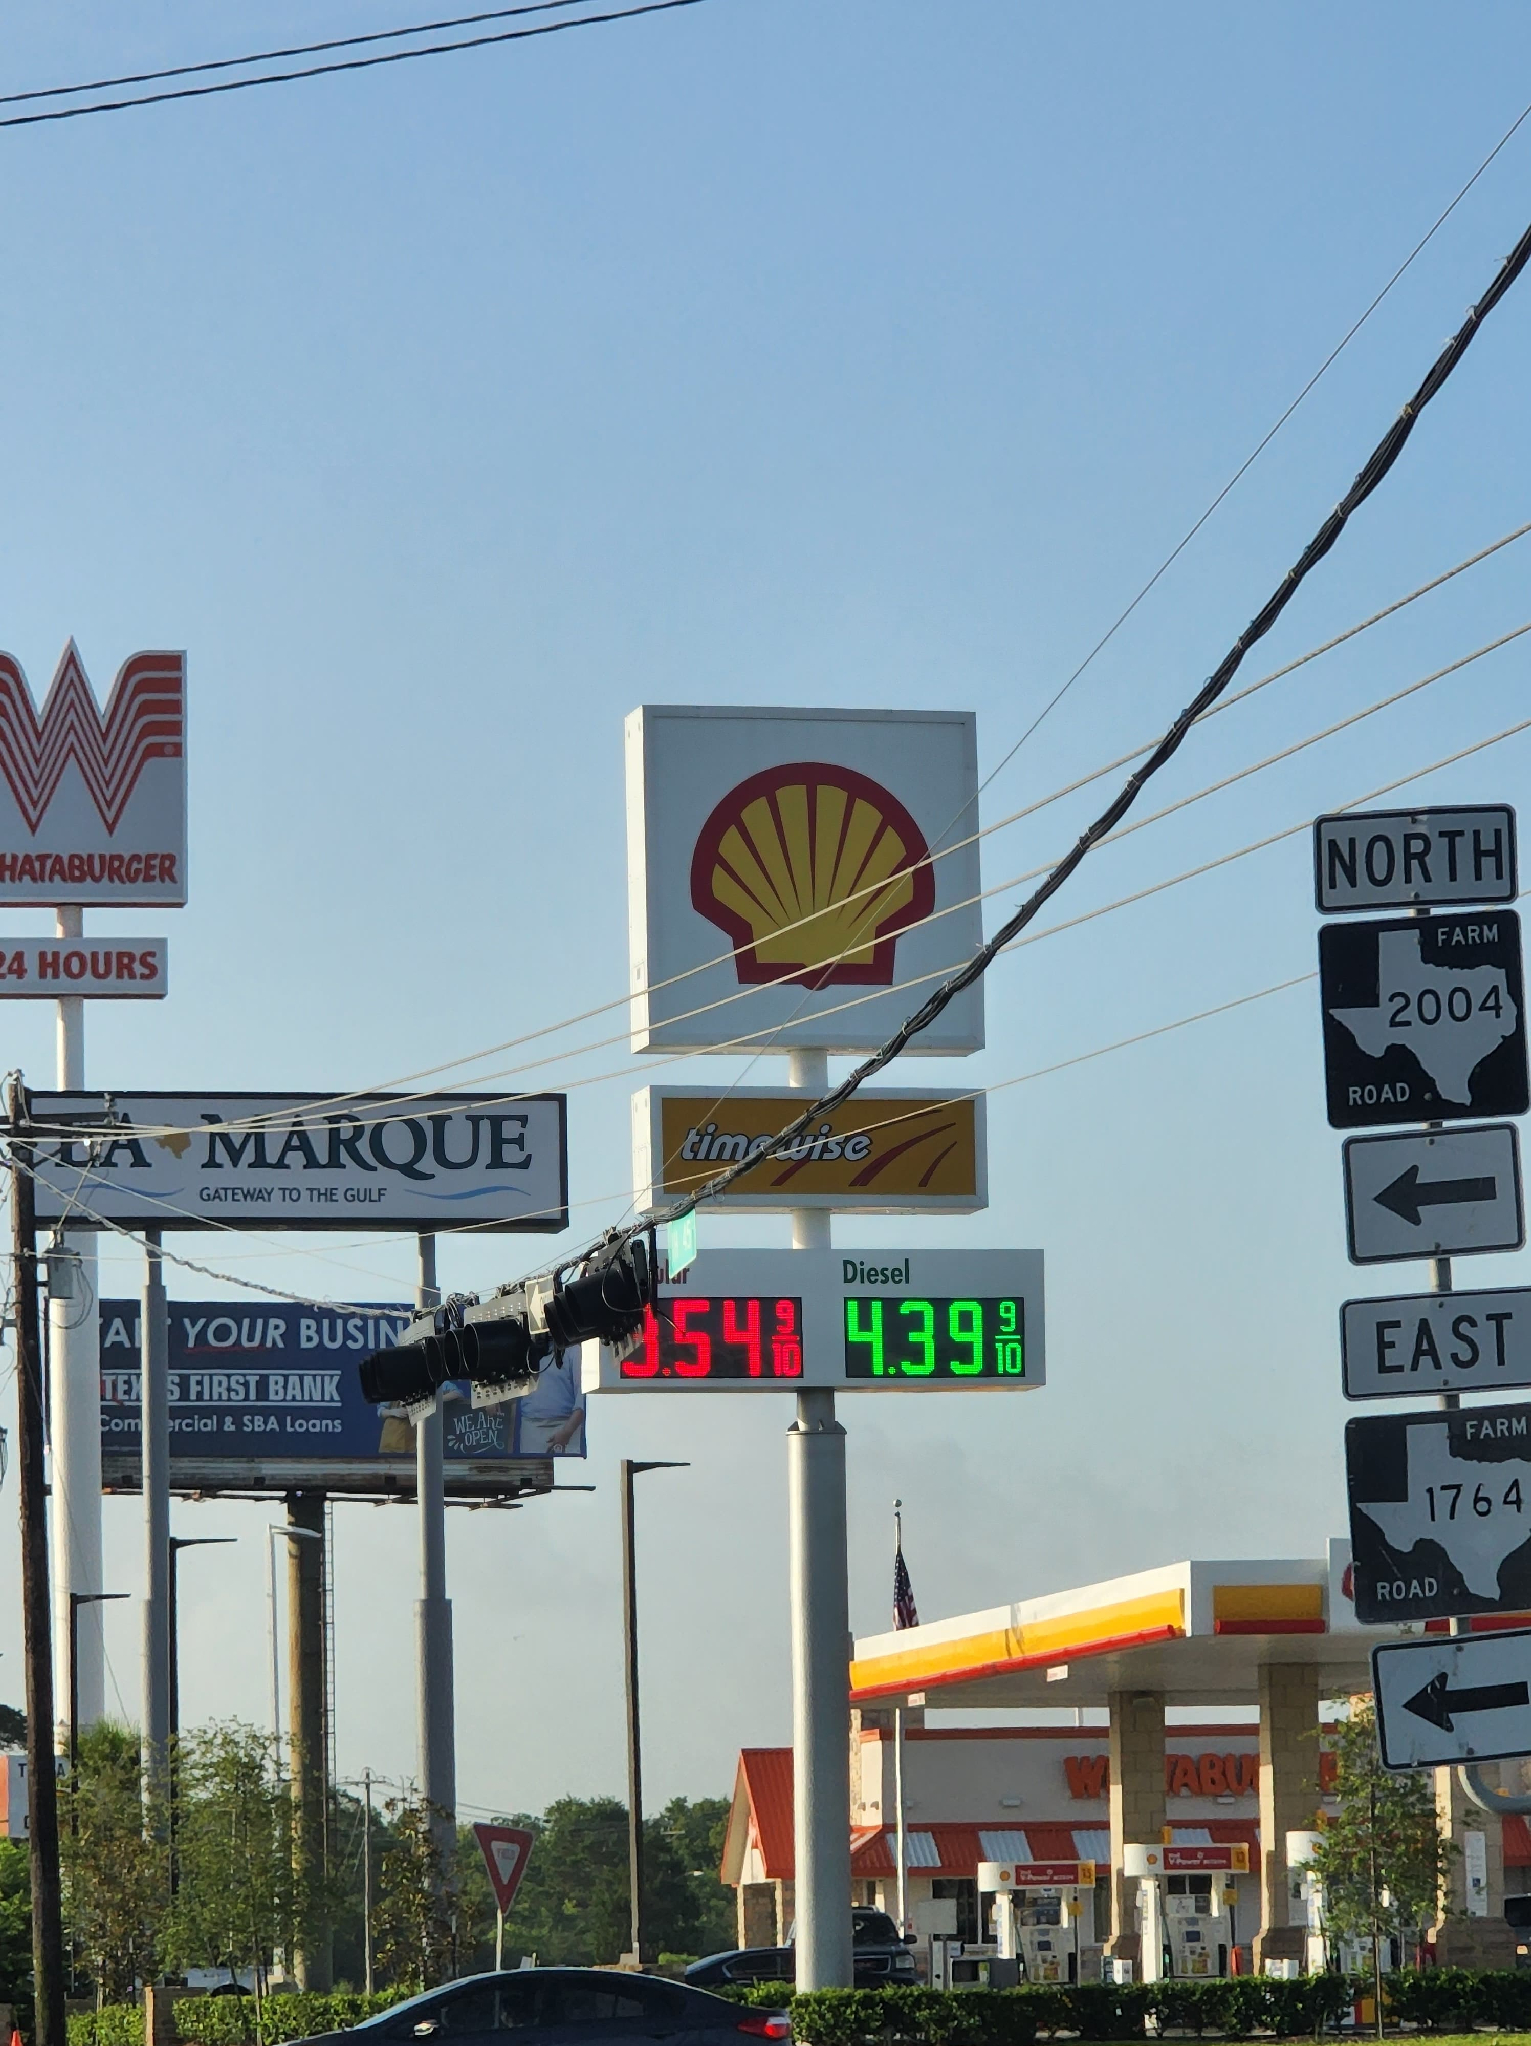 Shell Gas Station in La Marque, TX on July 16, 2022